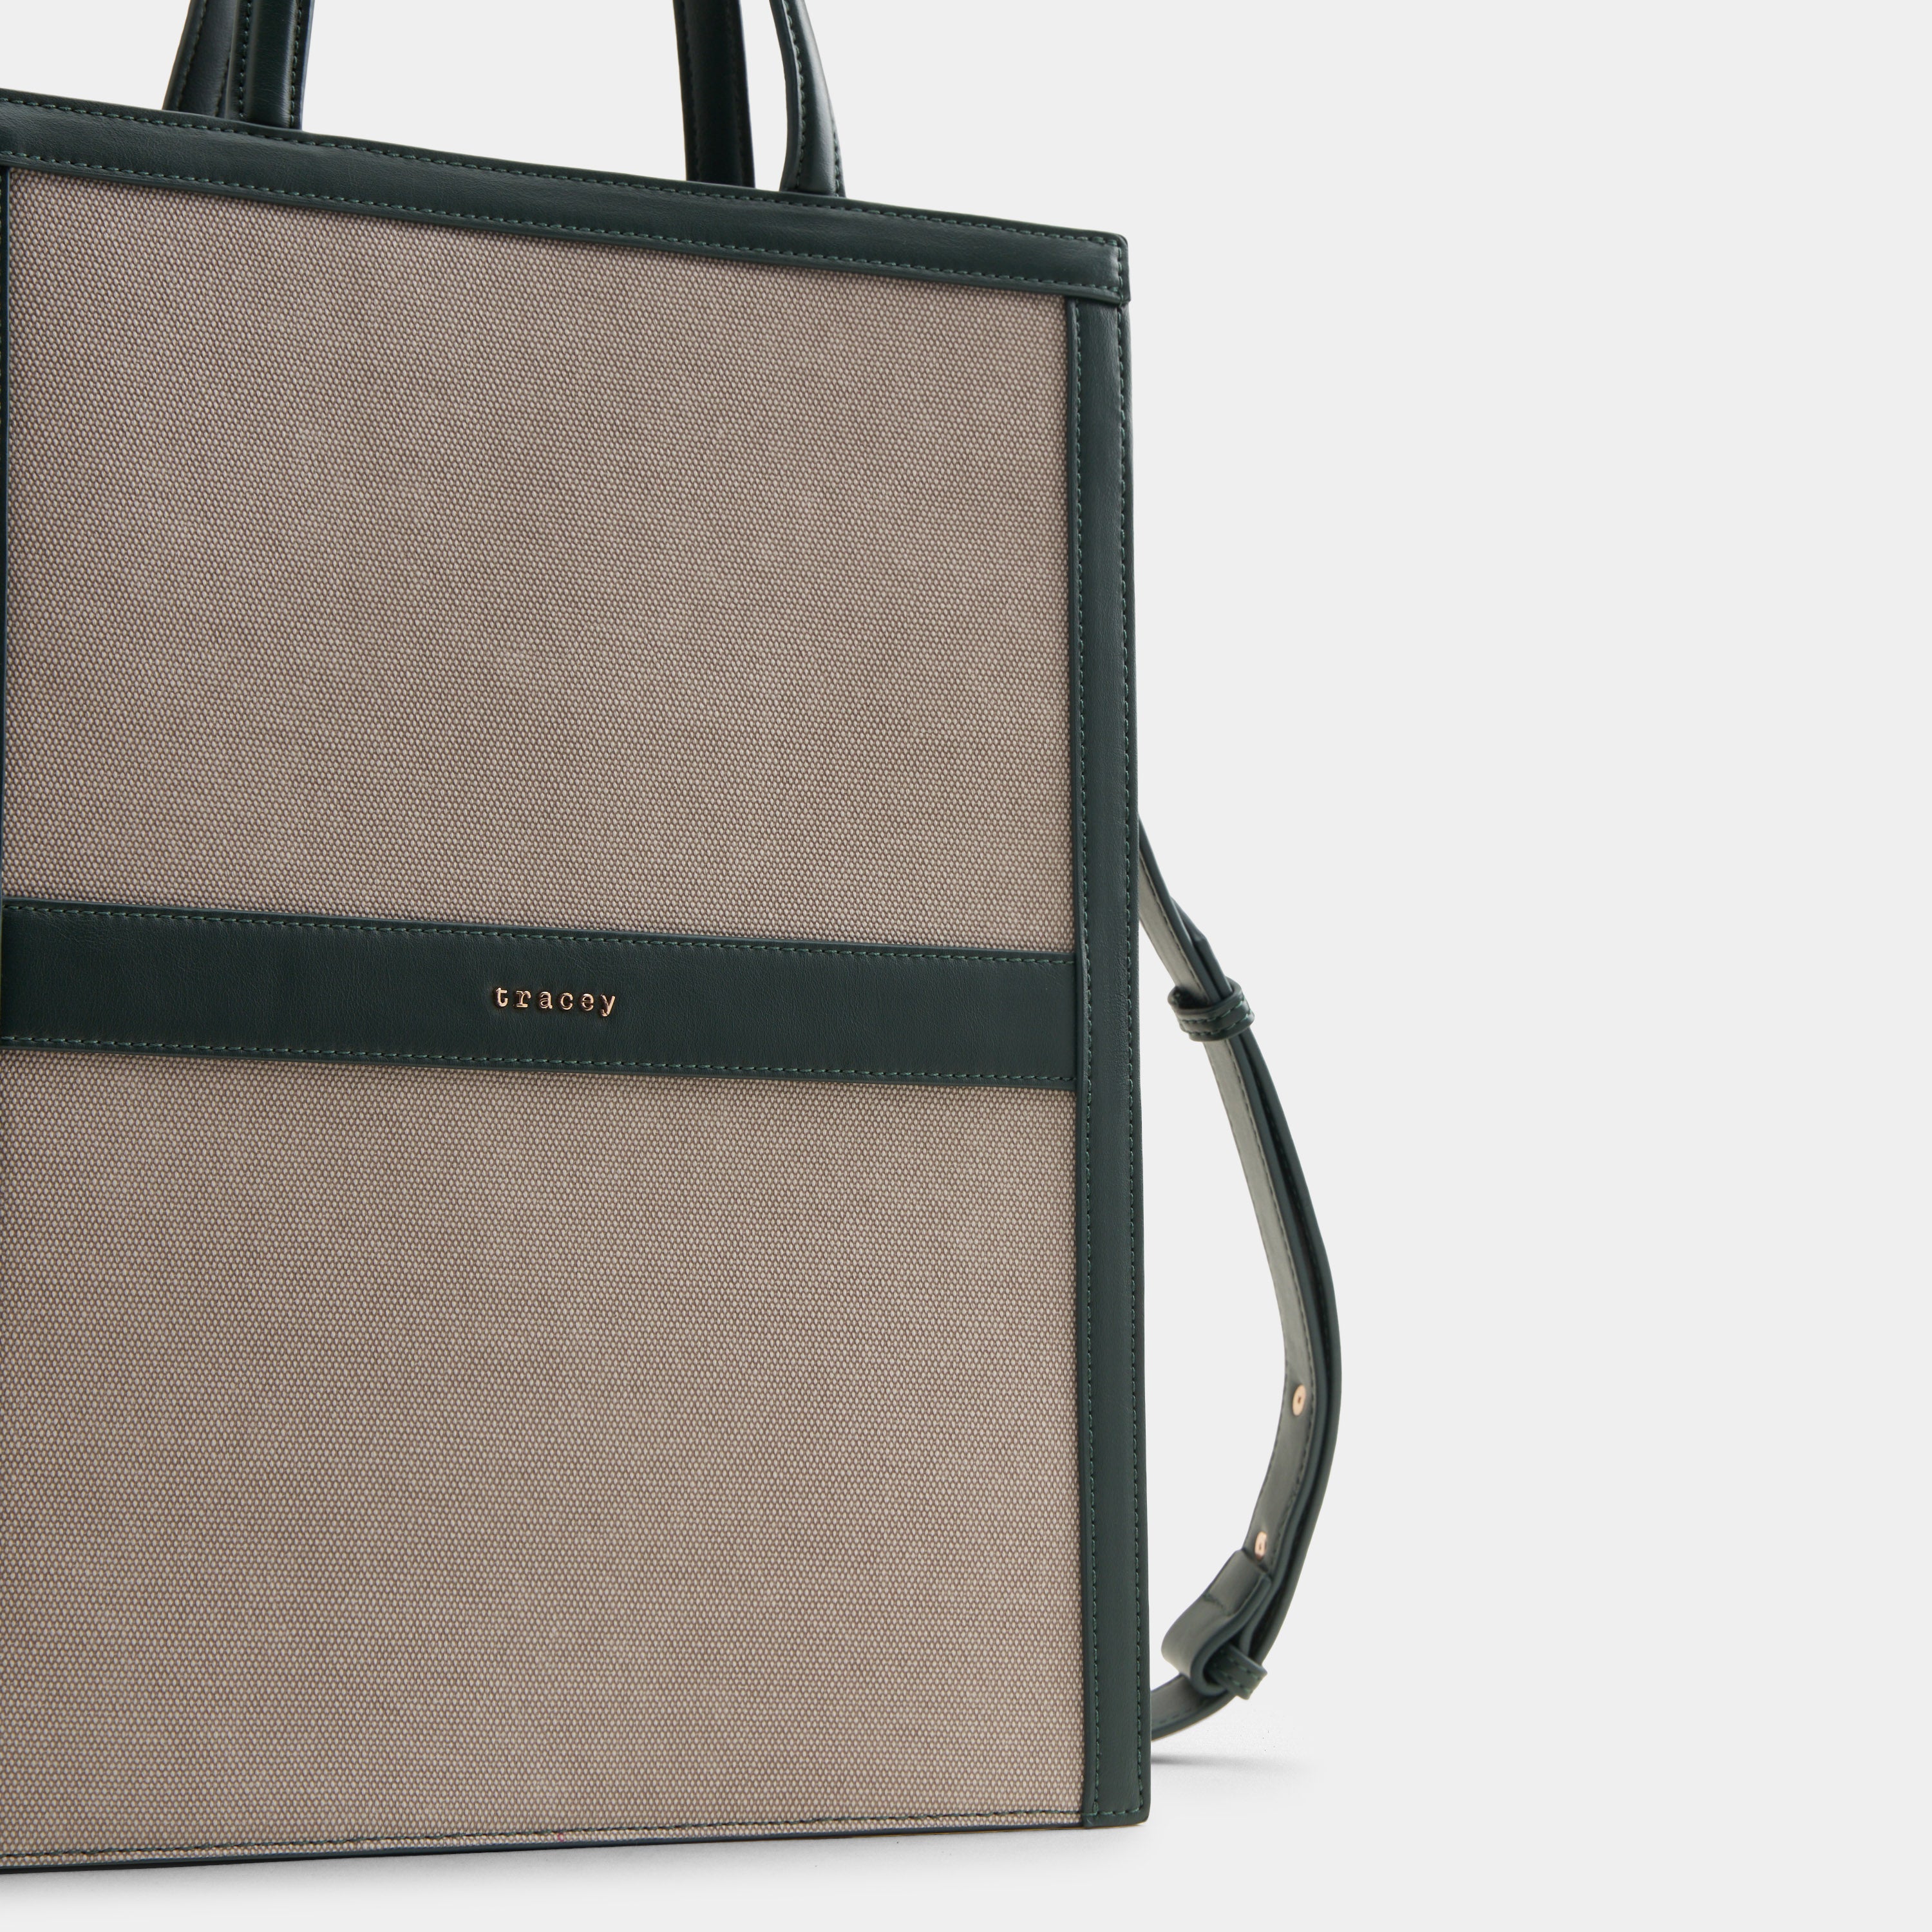 The City Tote Large Tall (Neutral Series) Compartment Bag